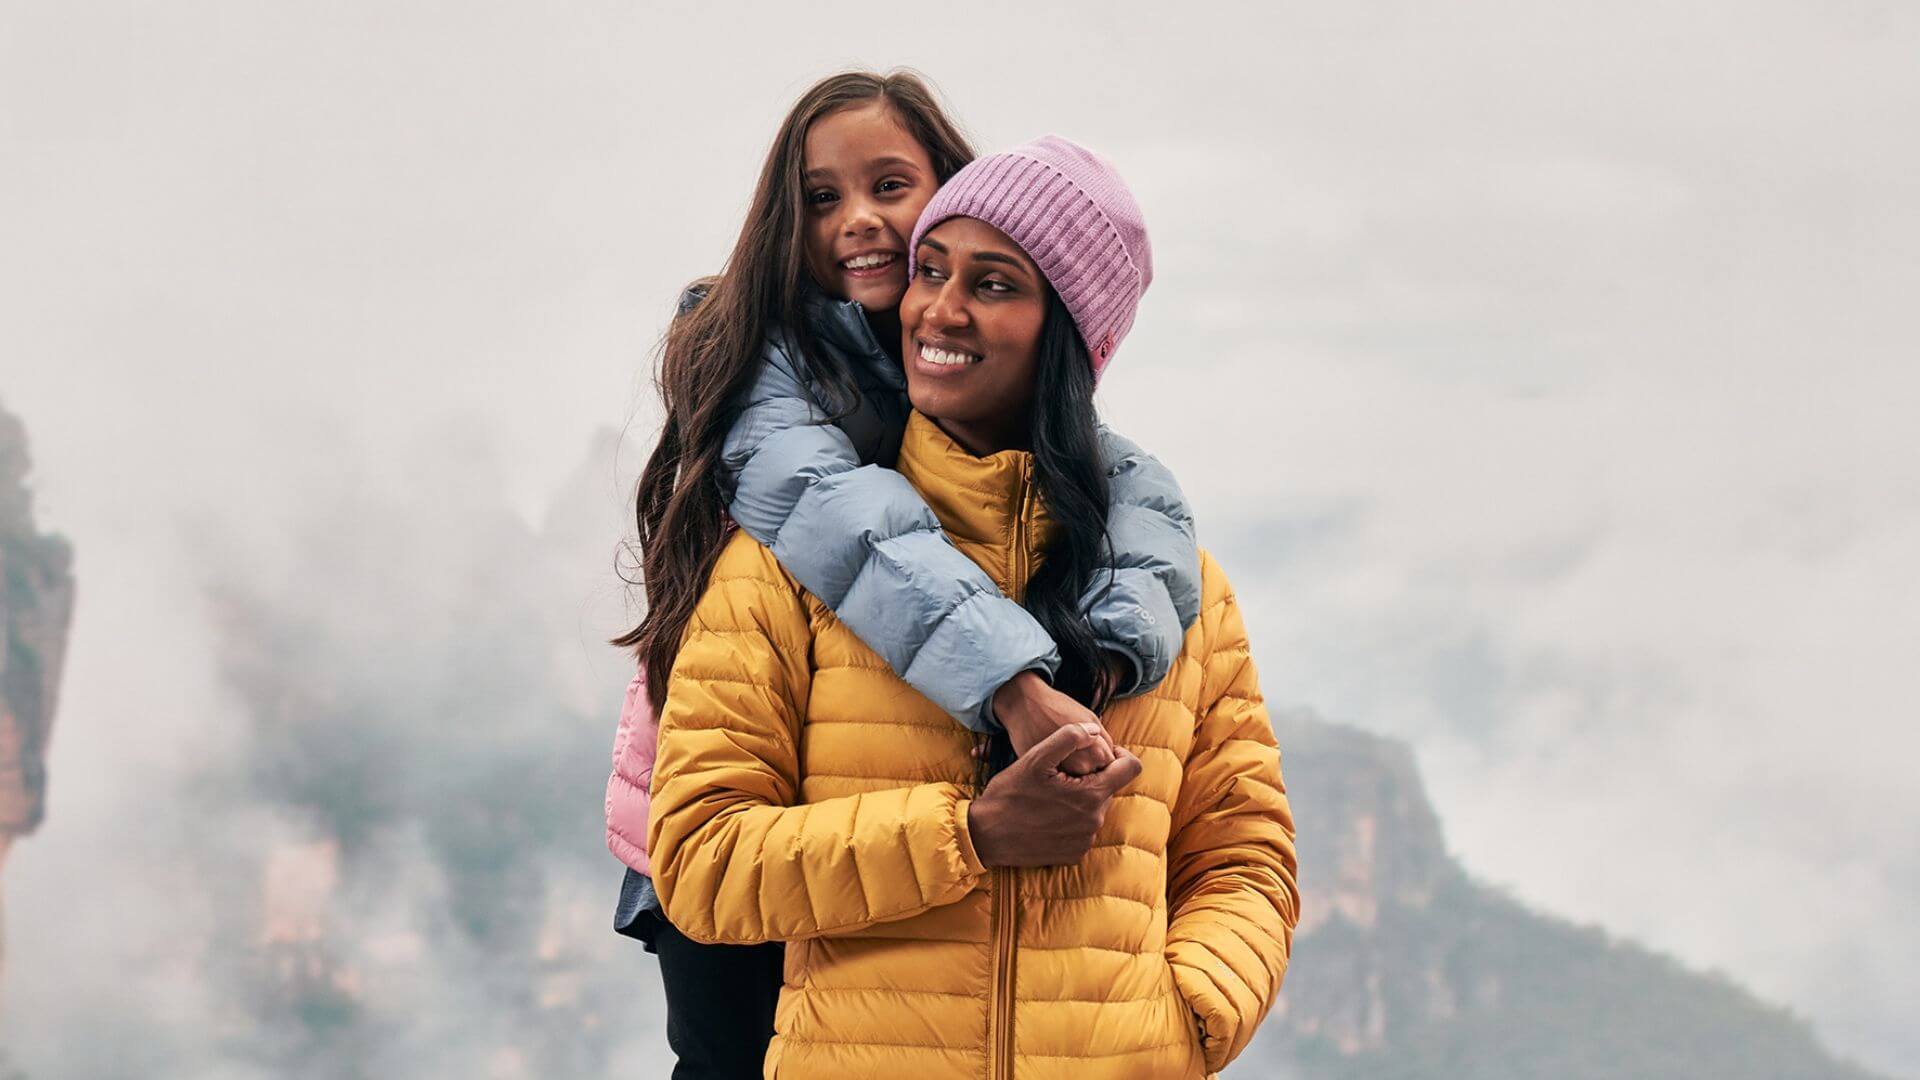 The Top 5 Puffer Jacket Styles For This Season